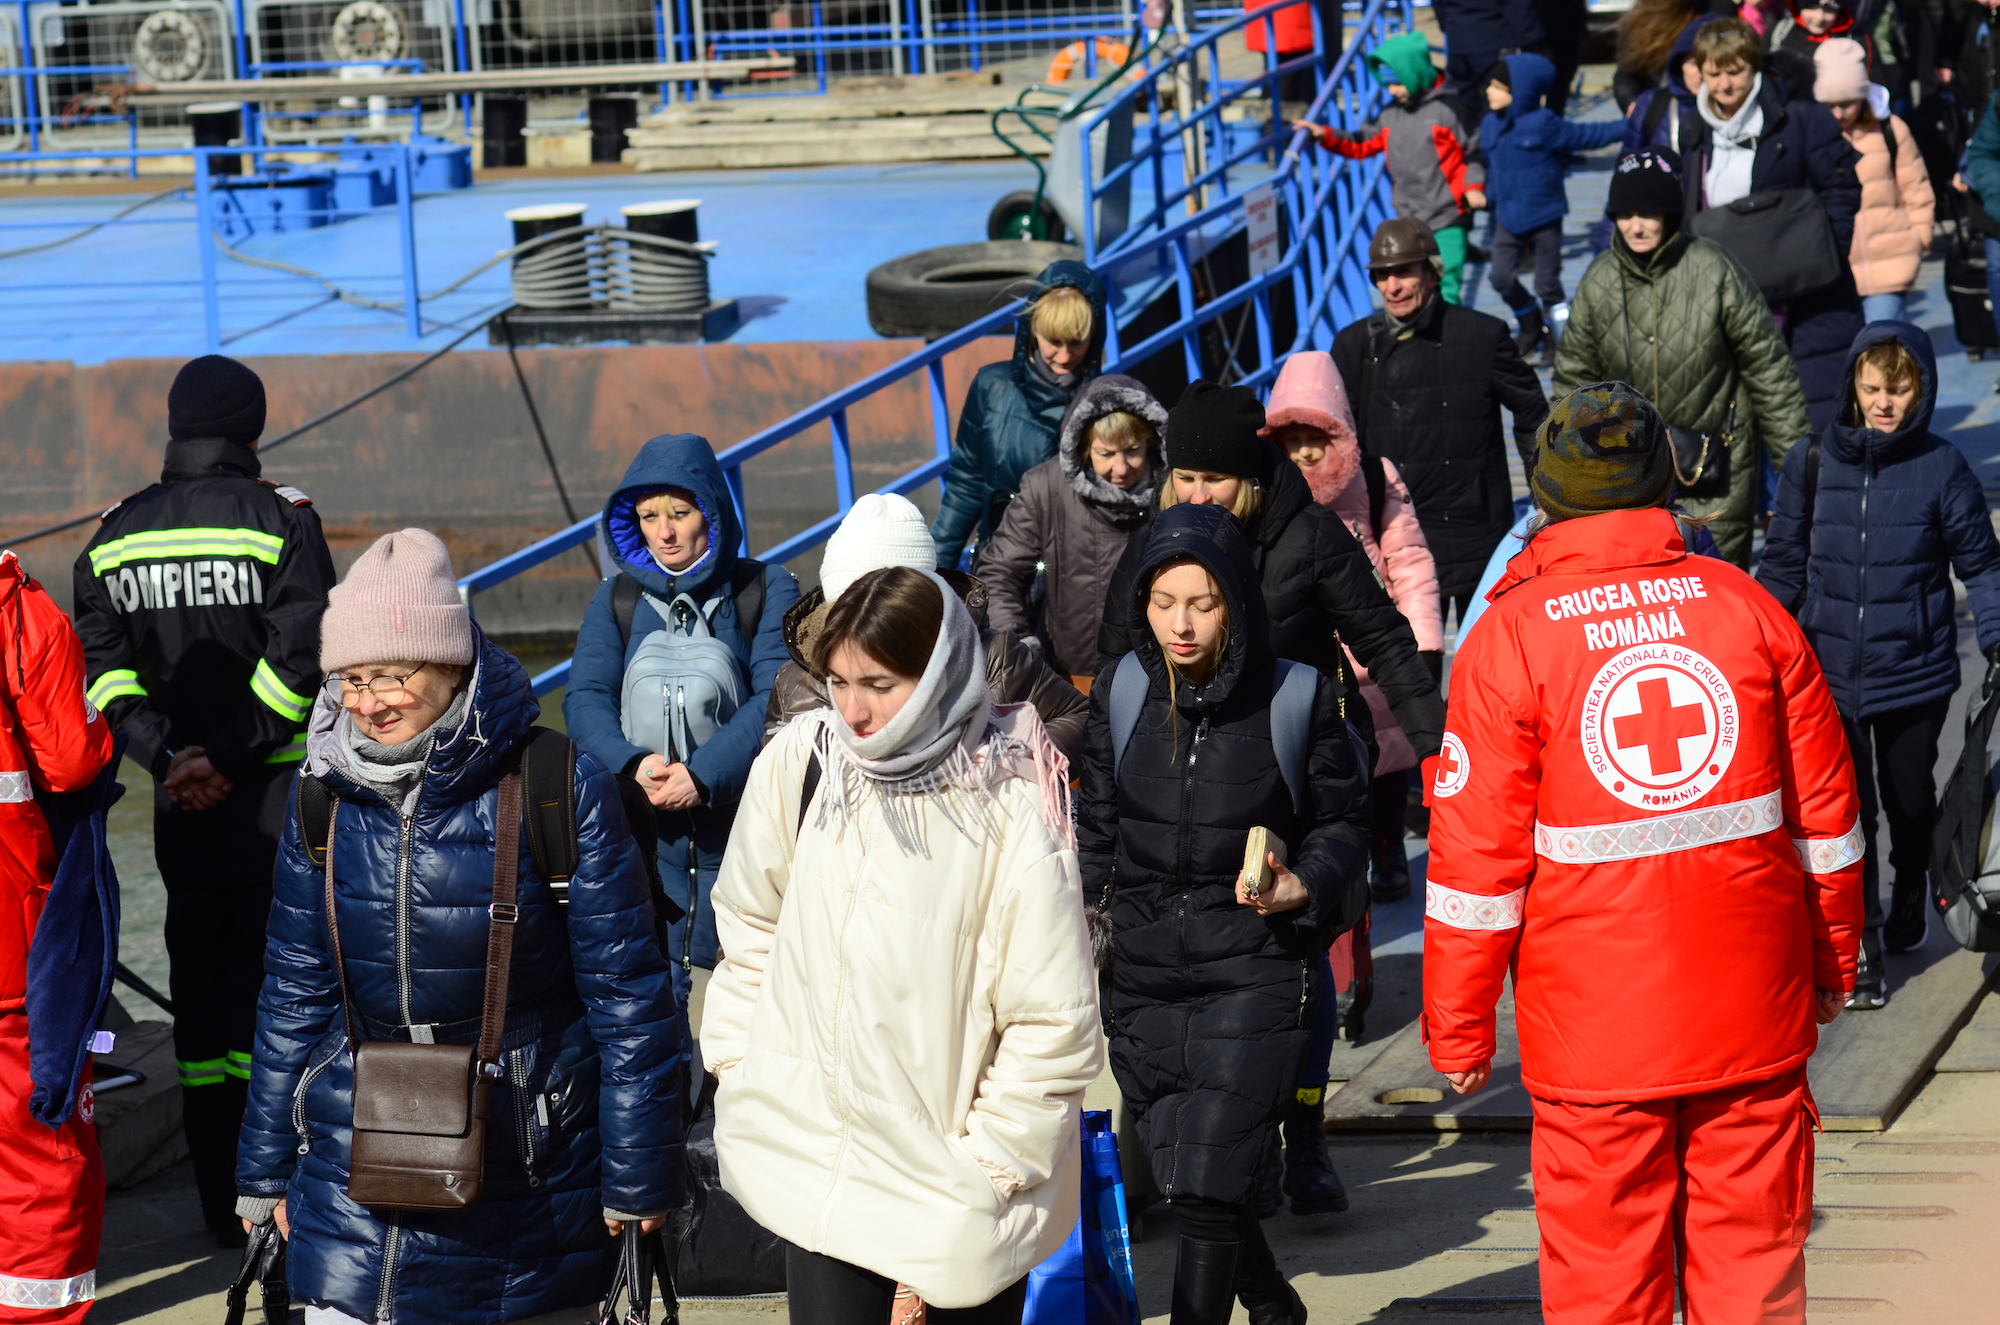 Almost all the people fleeing Ukraine into Romania are women and children - men aged 18-60 are not allowed to leave